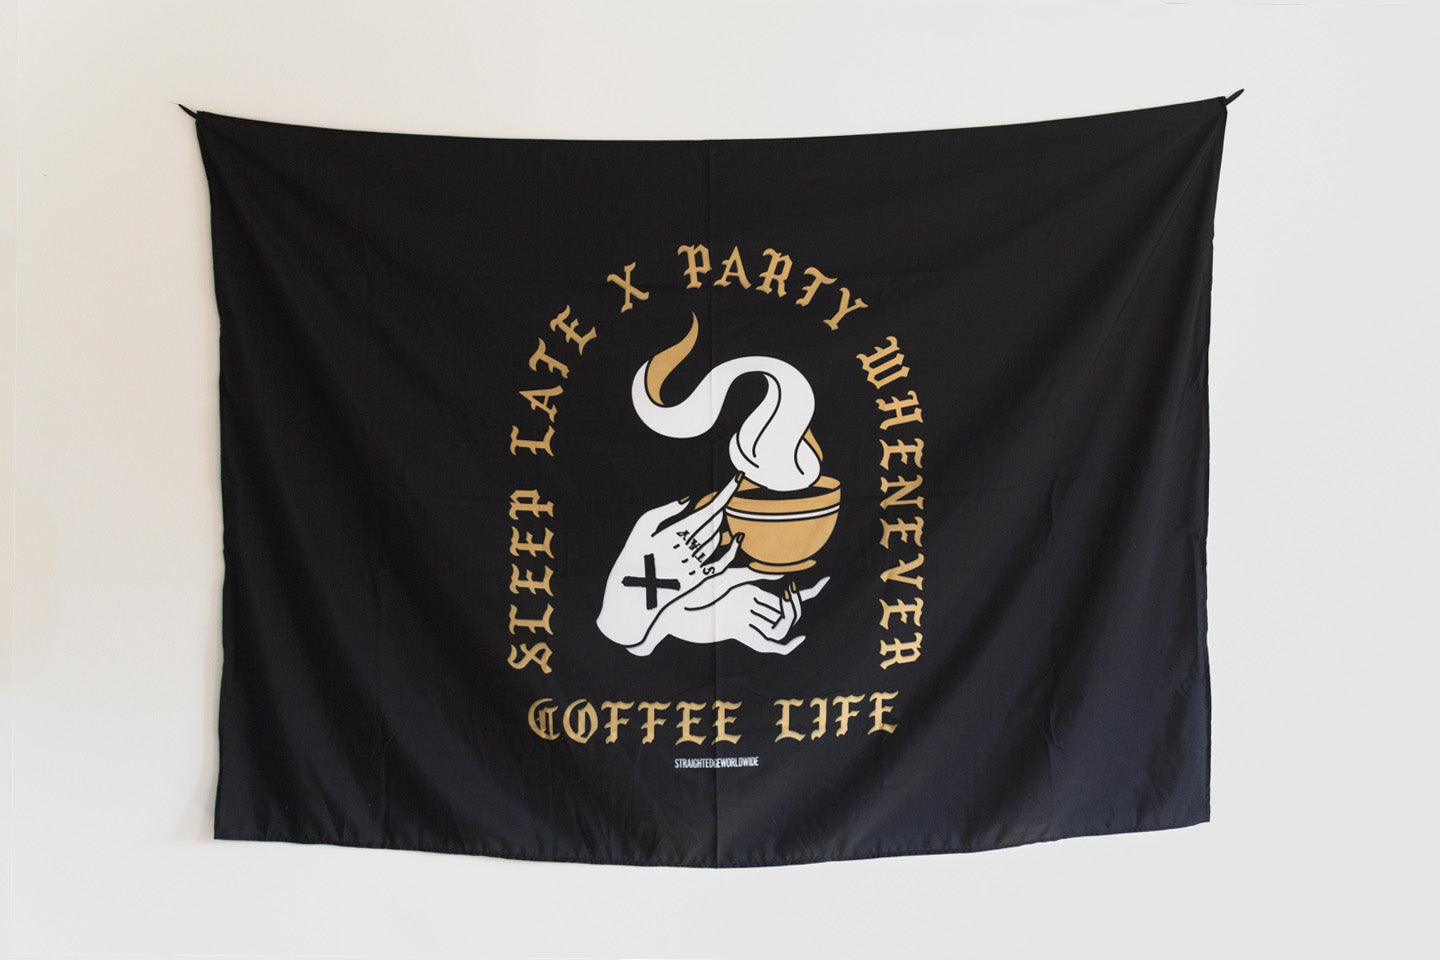 Coffee x Life black and gold print Straight Edge wall banner flag by STRAIGHTEDGEWORLDWIDE